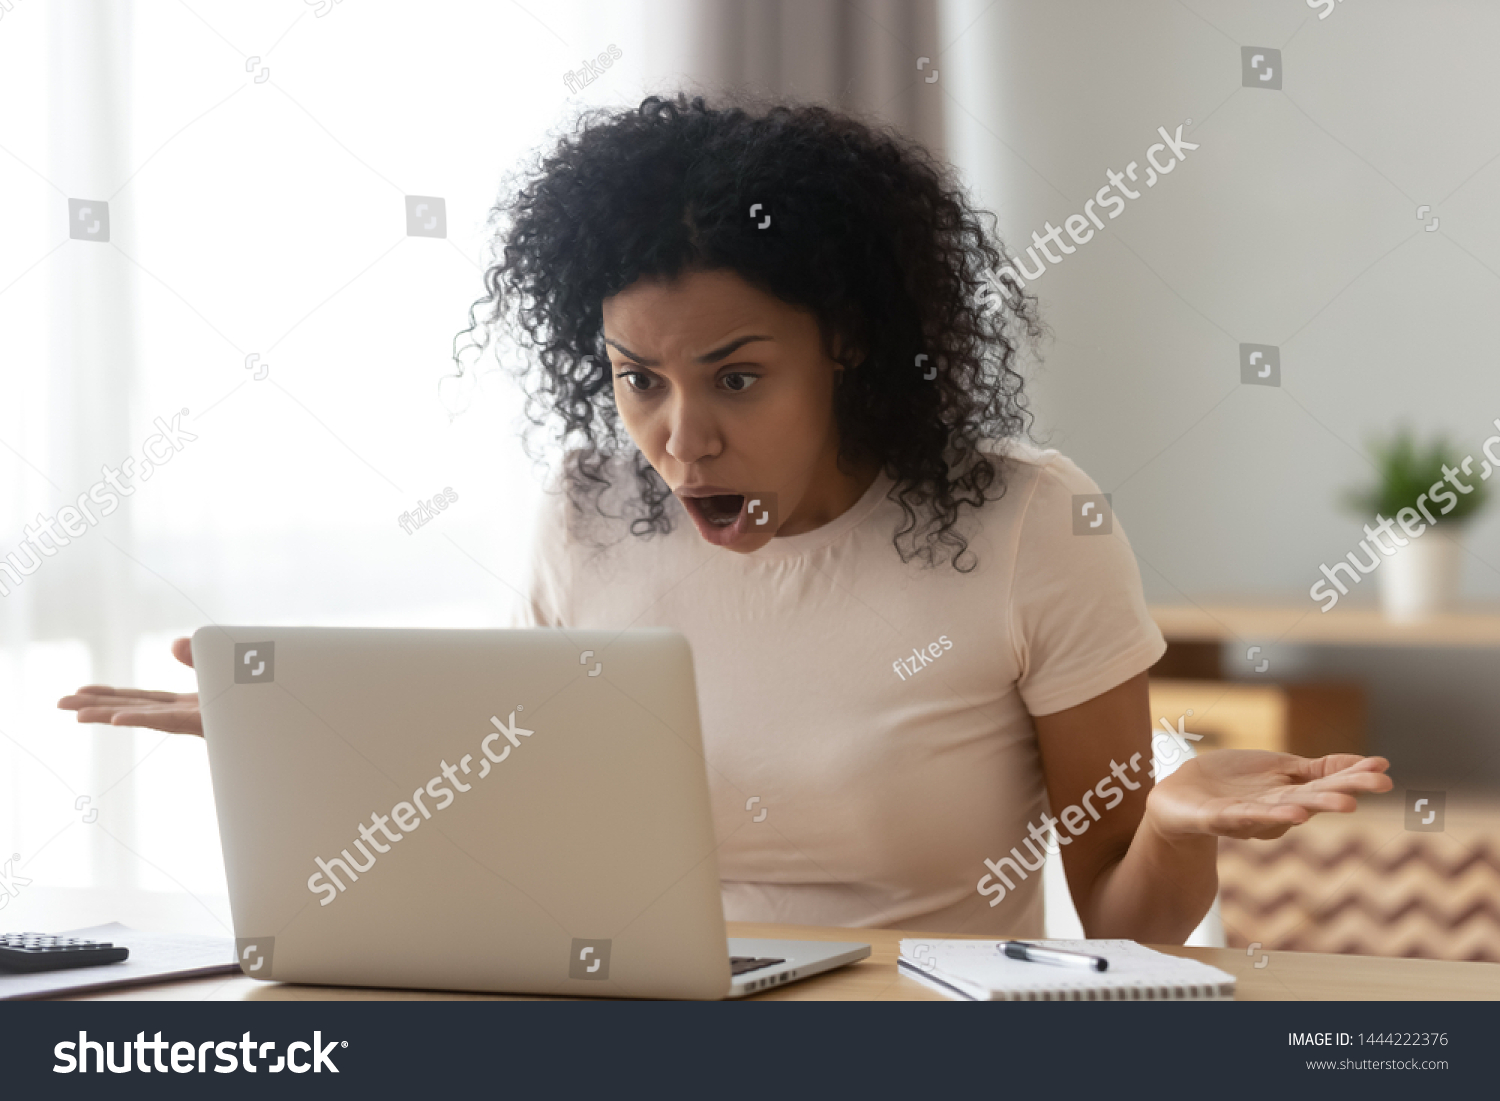 Shocked angry stressed african black woman customer looking at laptop screen feel bad surprise annoyed reading online news frustrated with stuck computer problem website error sit at home office desk #1444222376